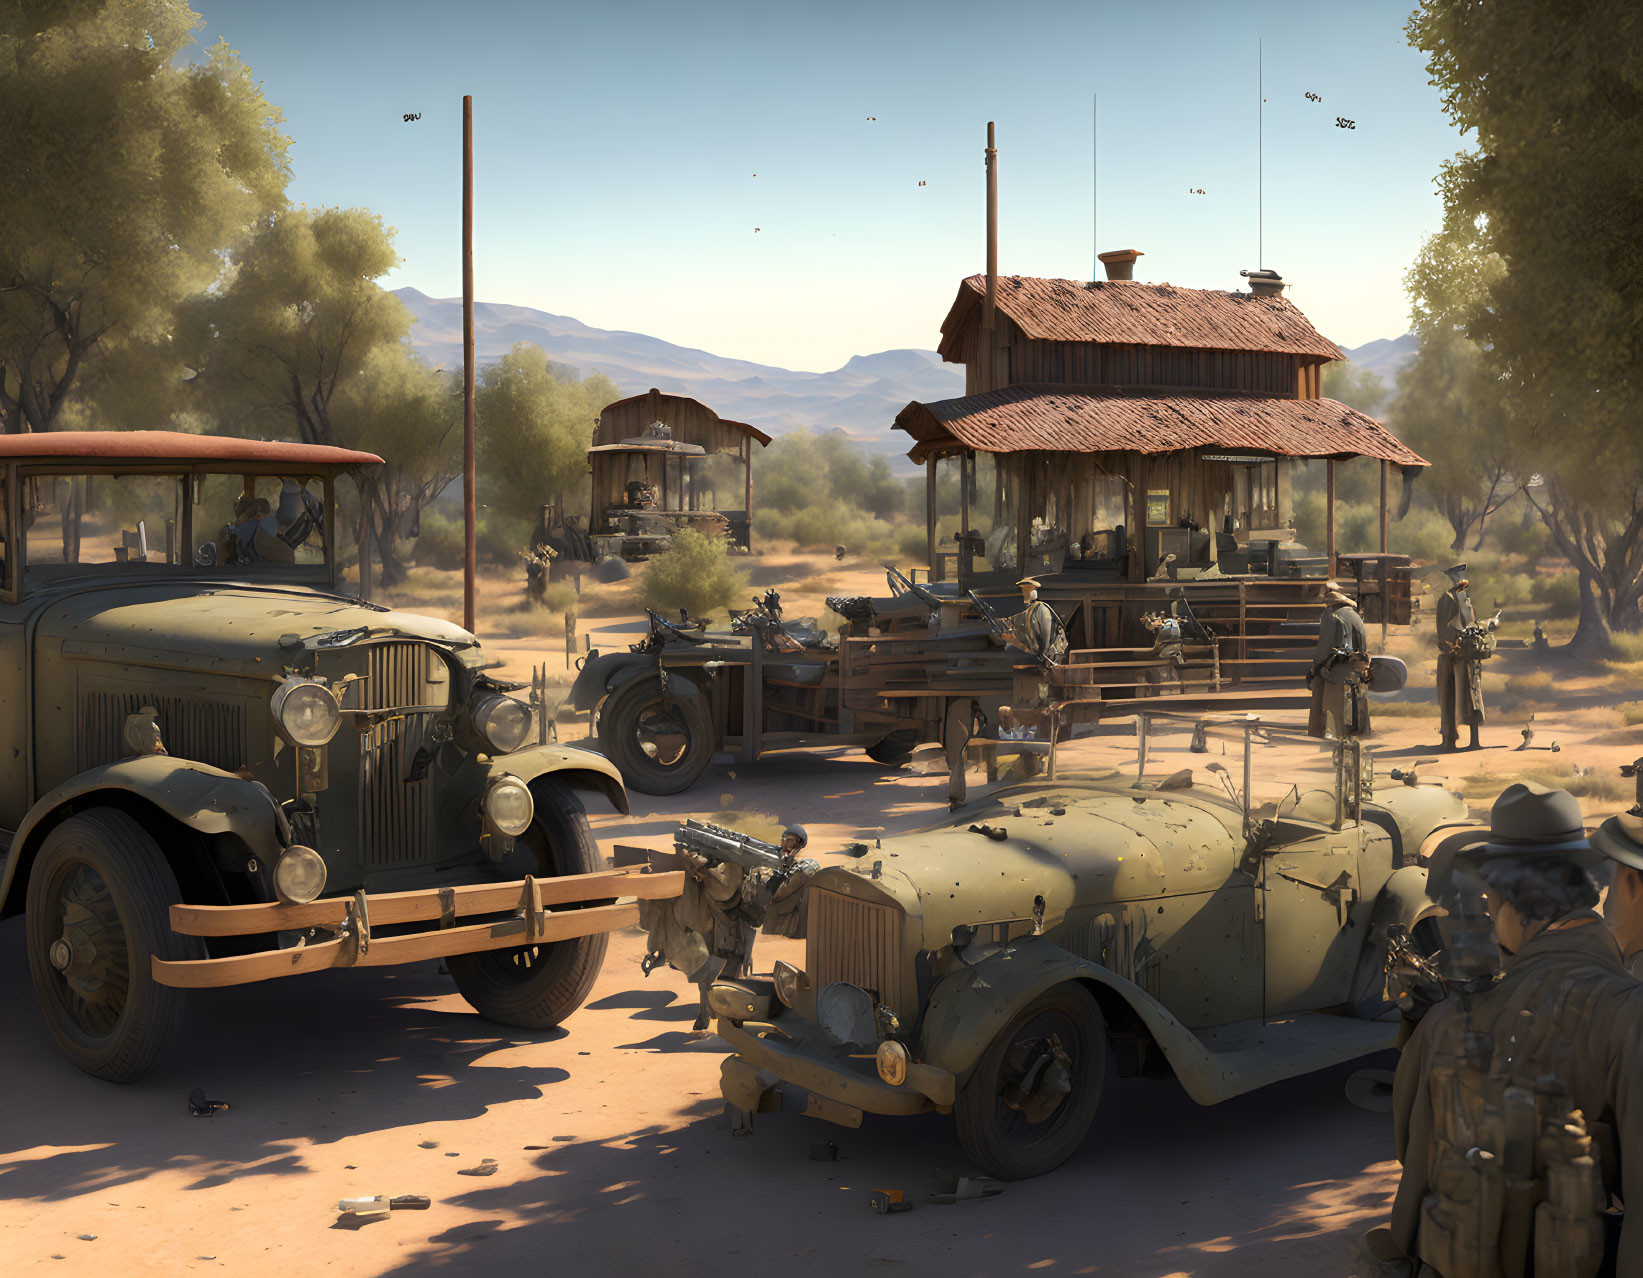 Vintage Military Encampment with Soldiers, Vehicles, and Observation Tower in Desert